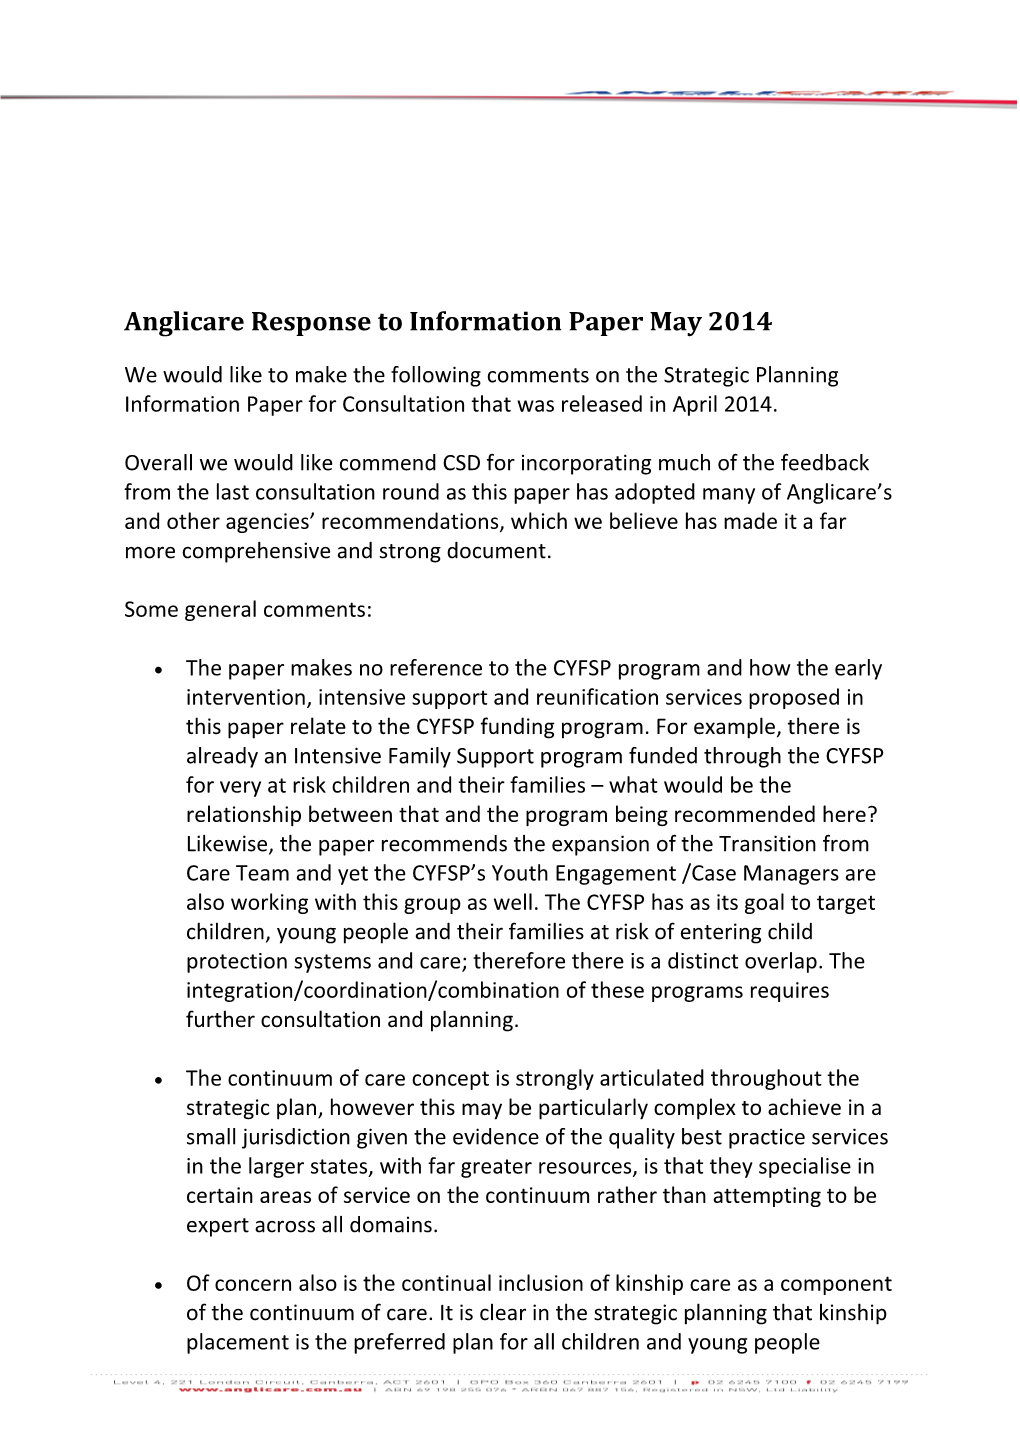 Anglicare Response to Information Paper May 2014